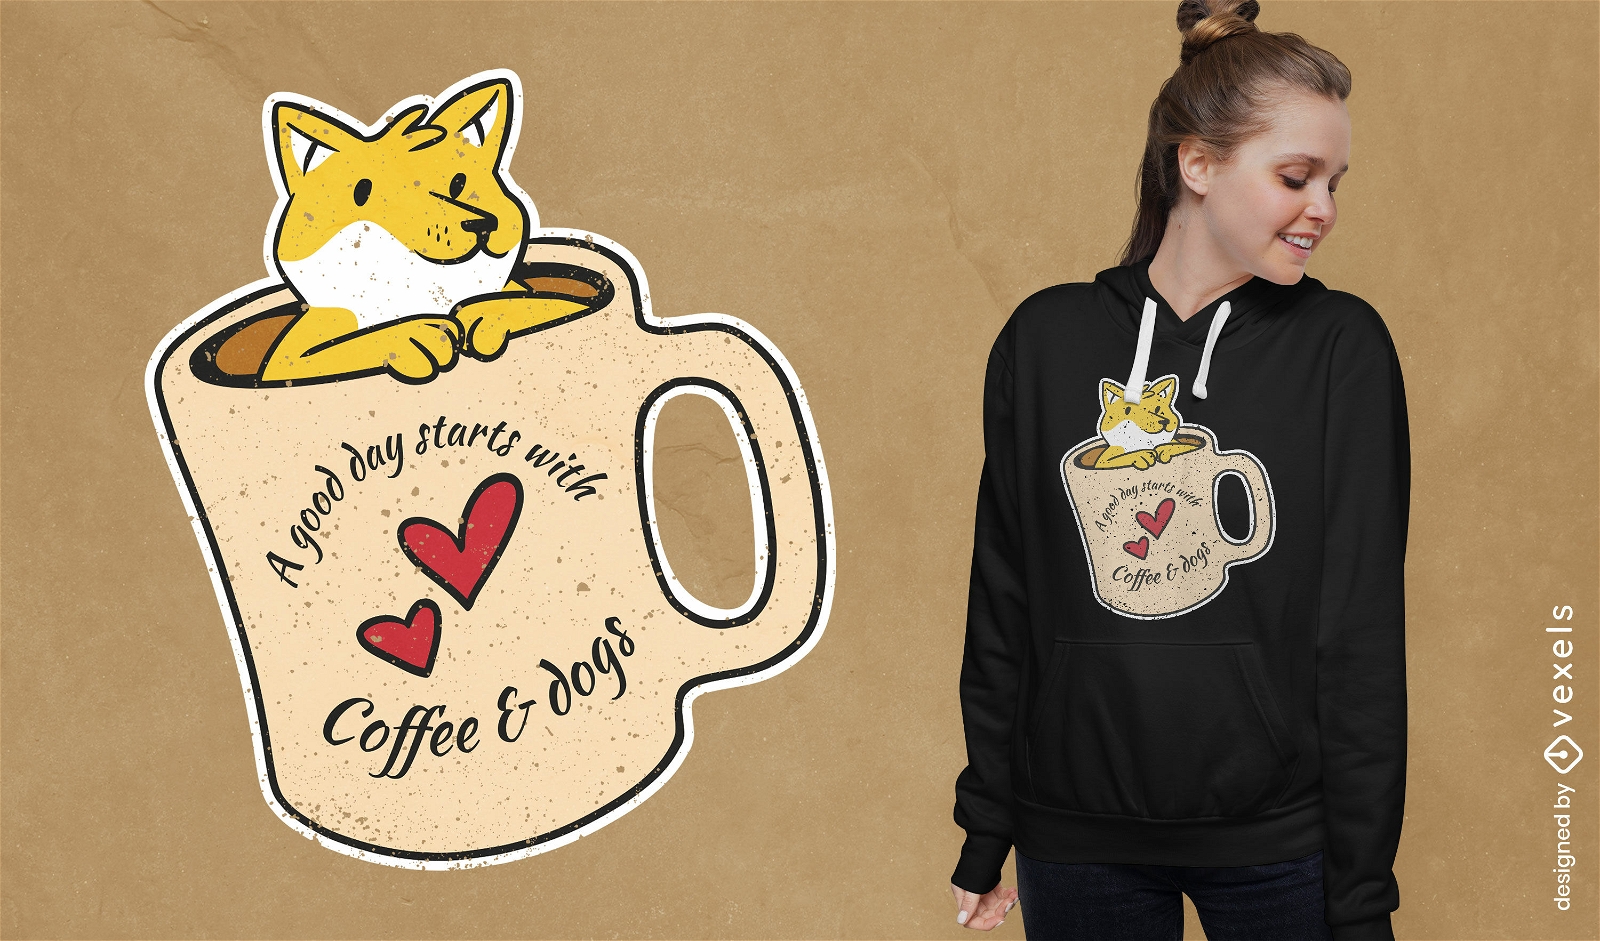 Coffee and dogs t-shirt design